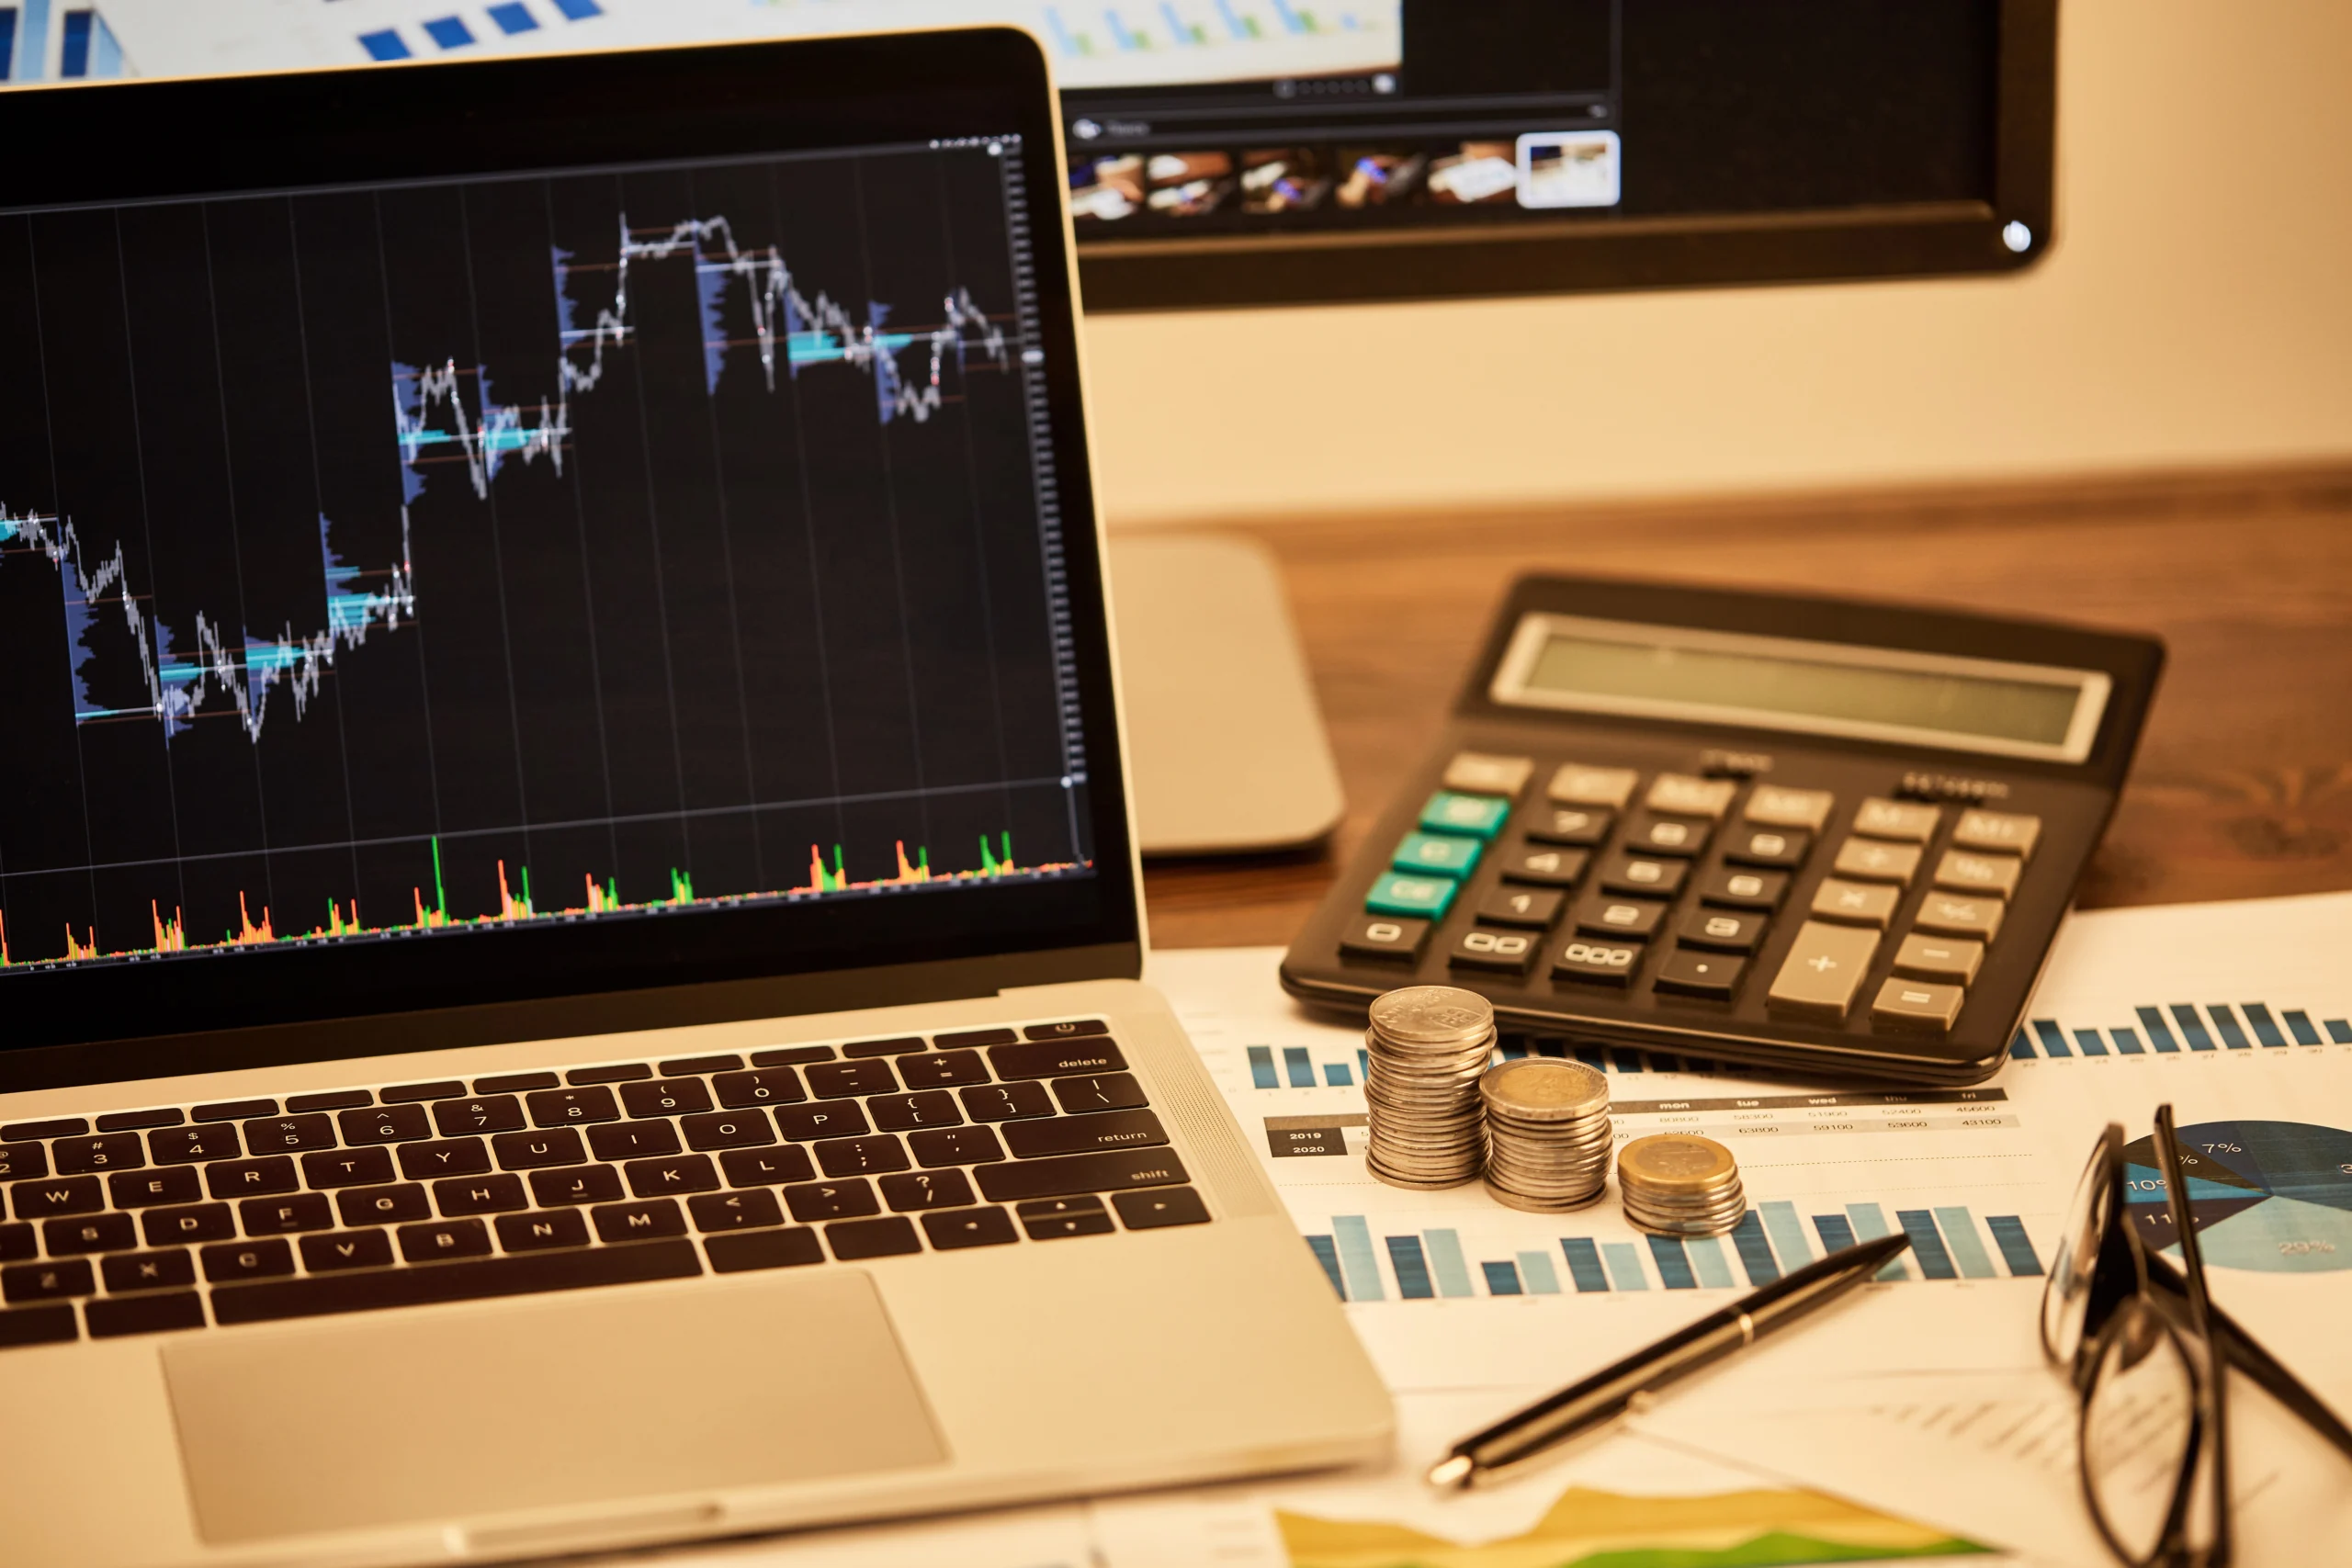 trading chart on a laptop with calculator and stacks of coins beside it